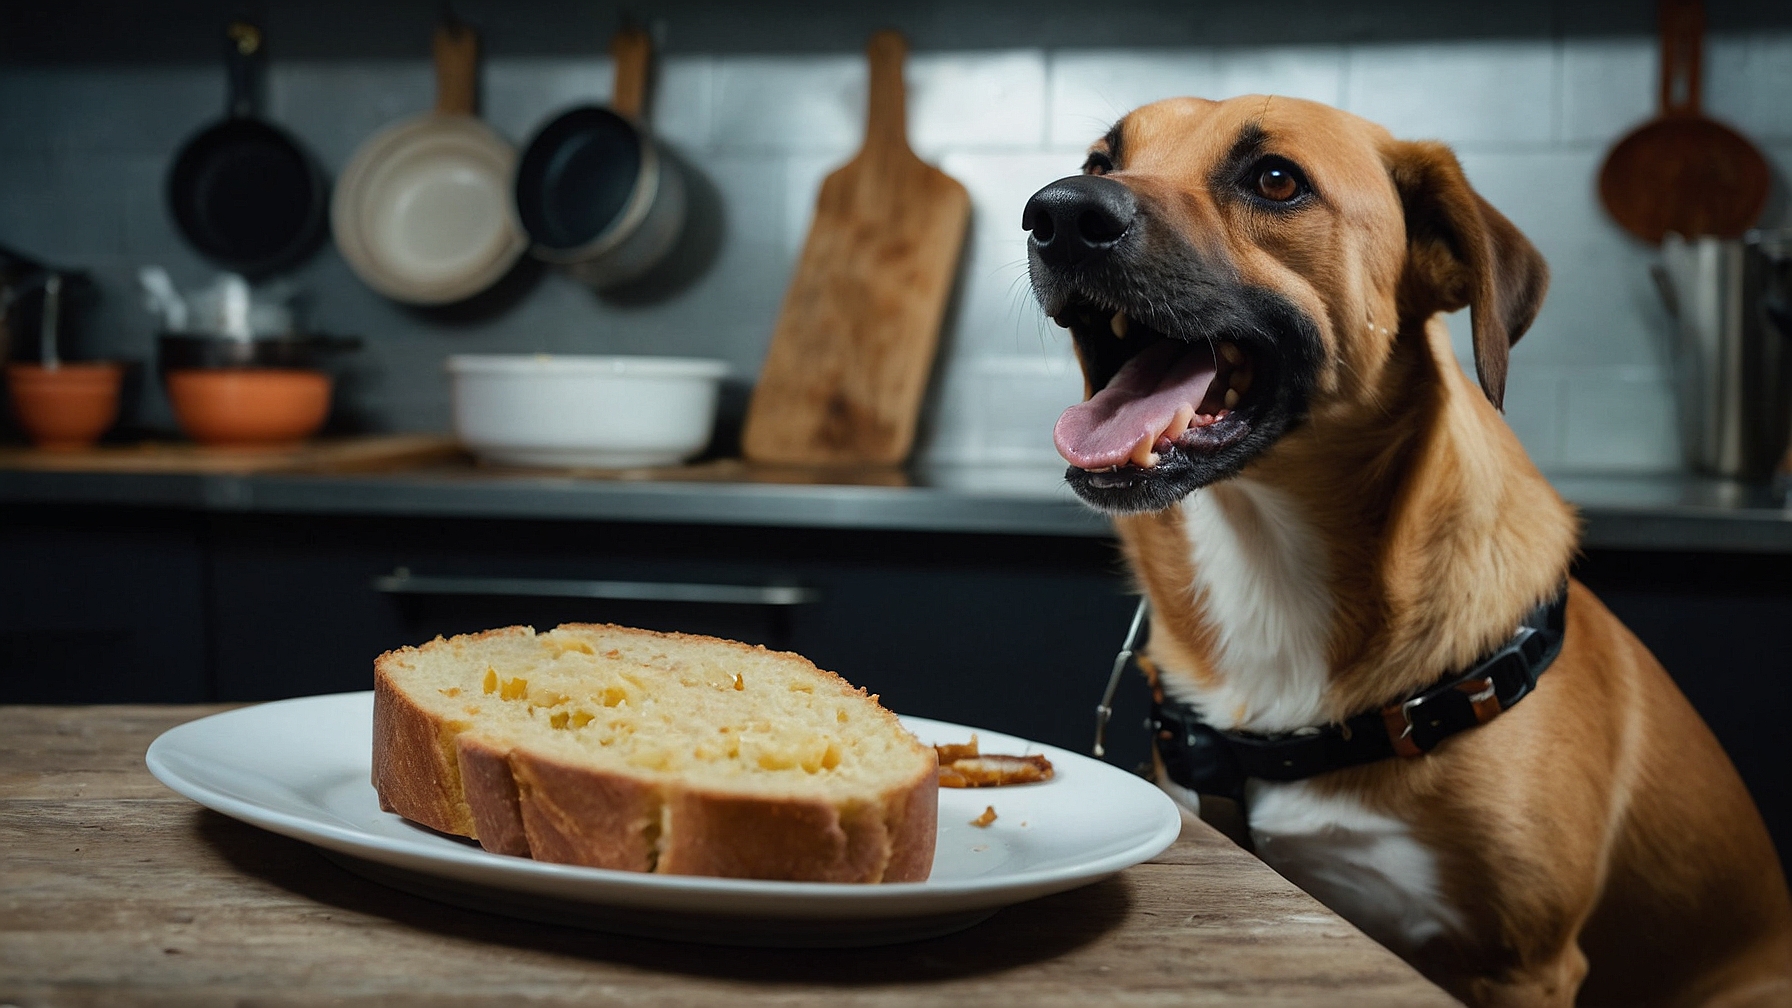 Can dog eat potato bread: Is Potato Bread a Yay or Nay?